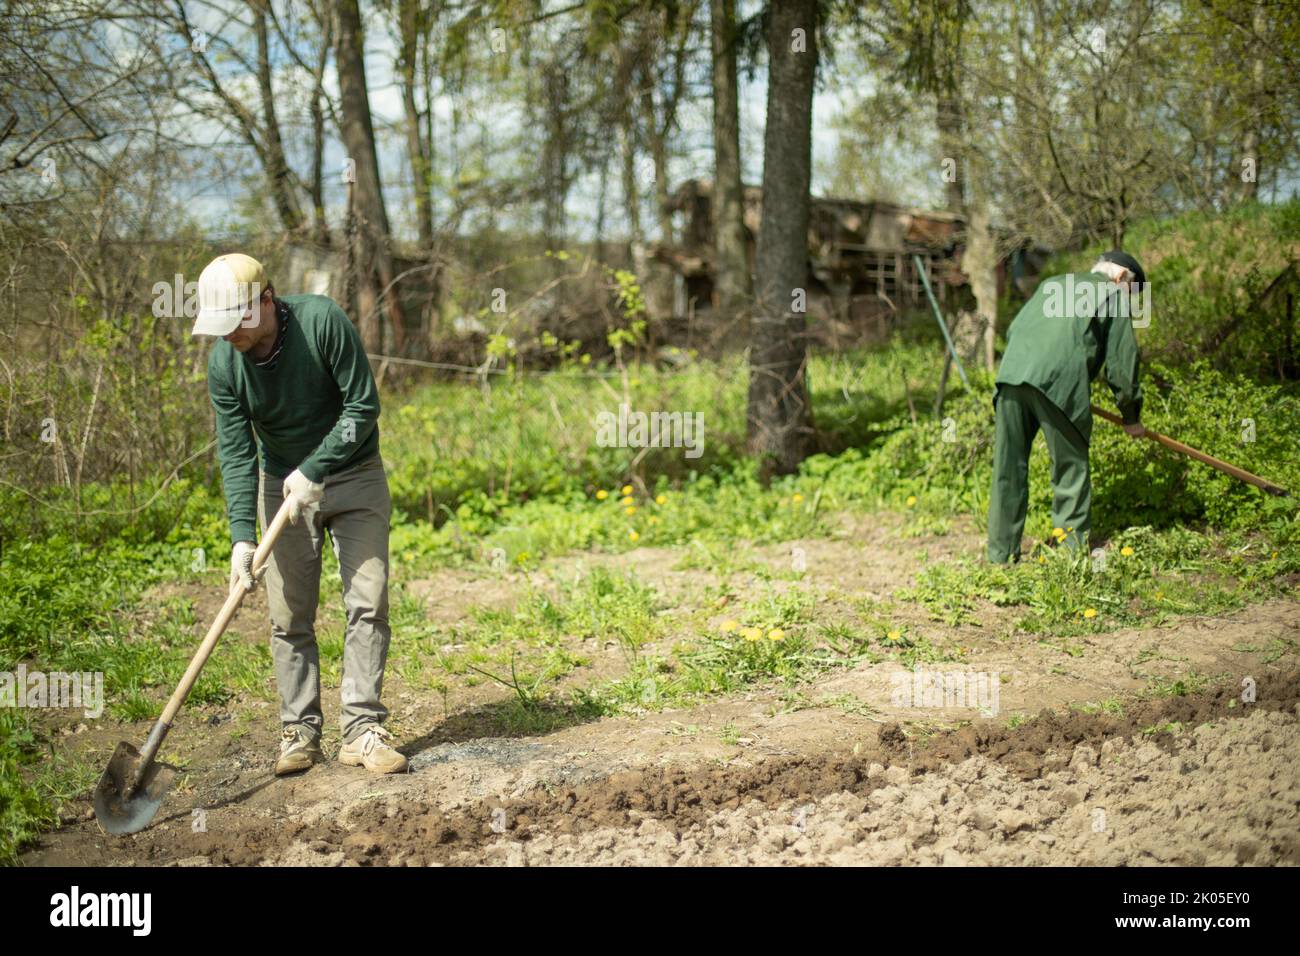 Guy digs soil with shovel. Digging up ground for planting. Work in garden. Life in countryside. Man works. Stock Photo